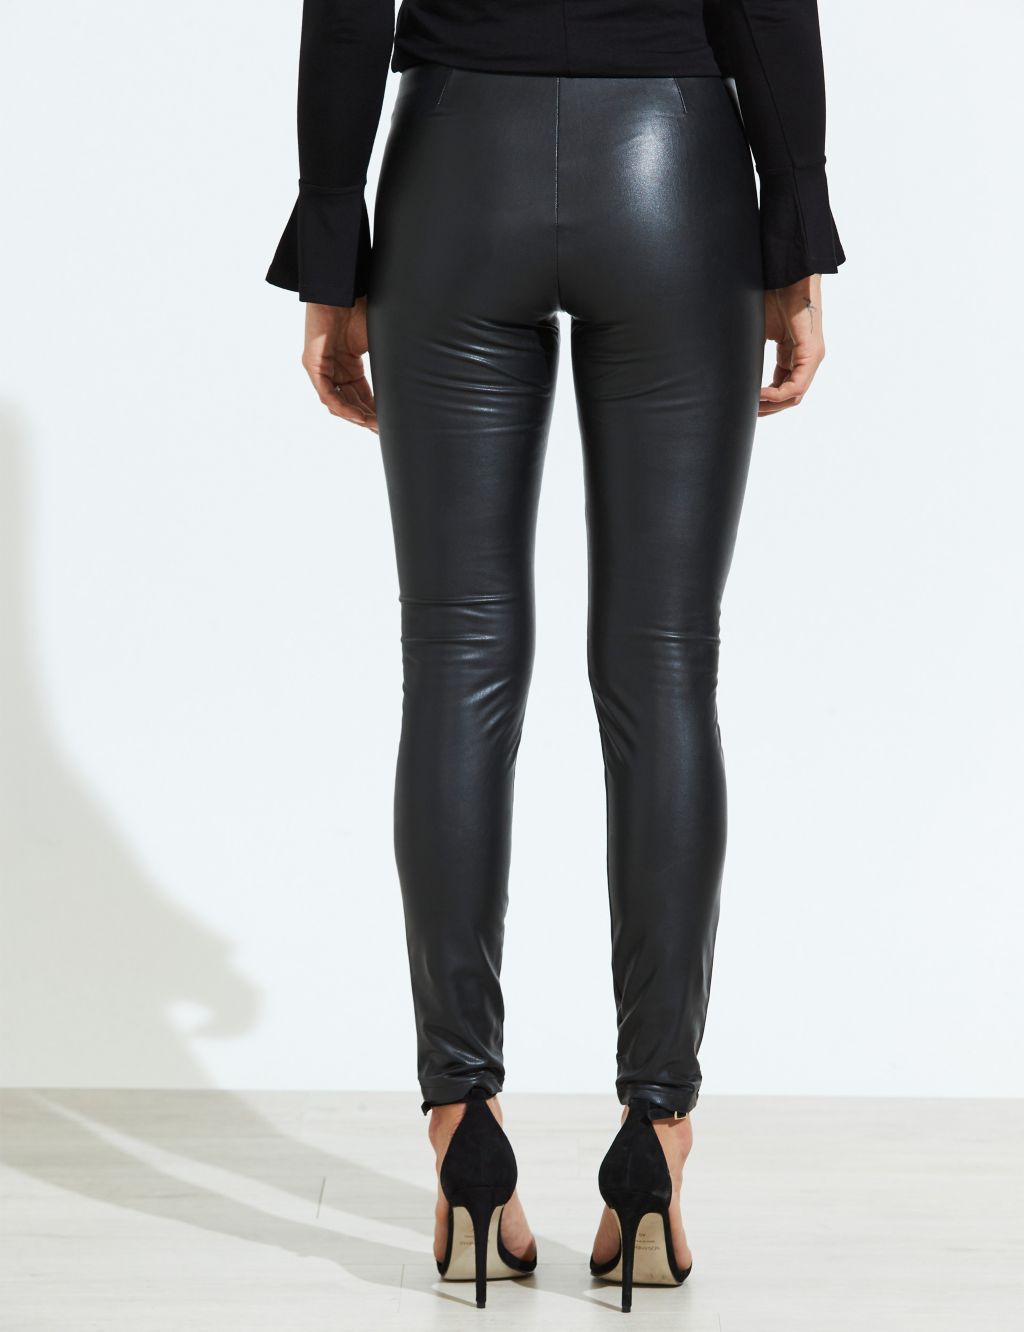 Leather Look High Waisted Leggings image 6